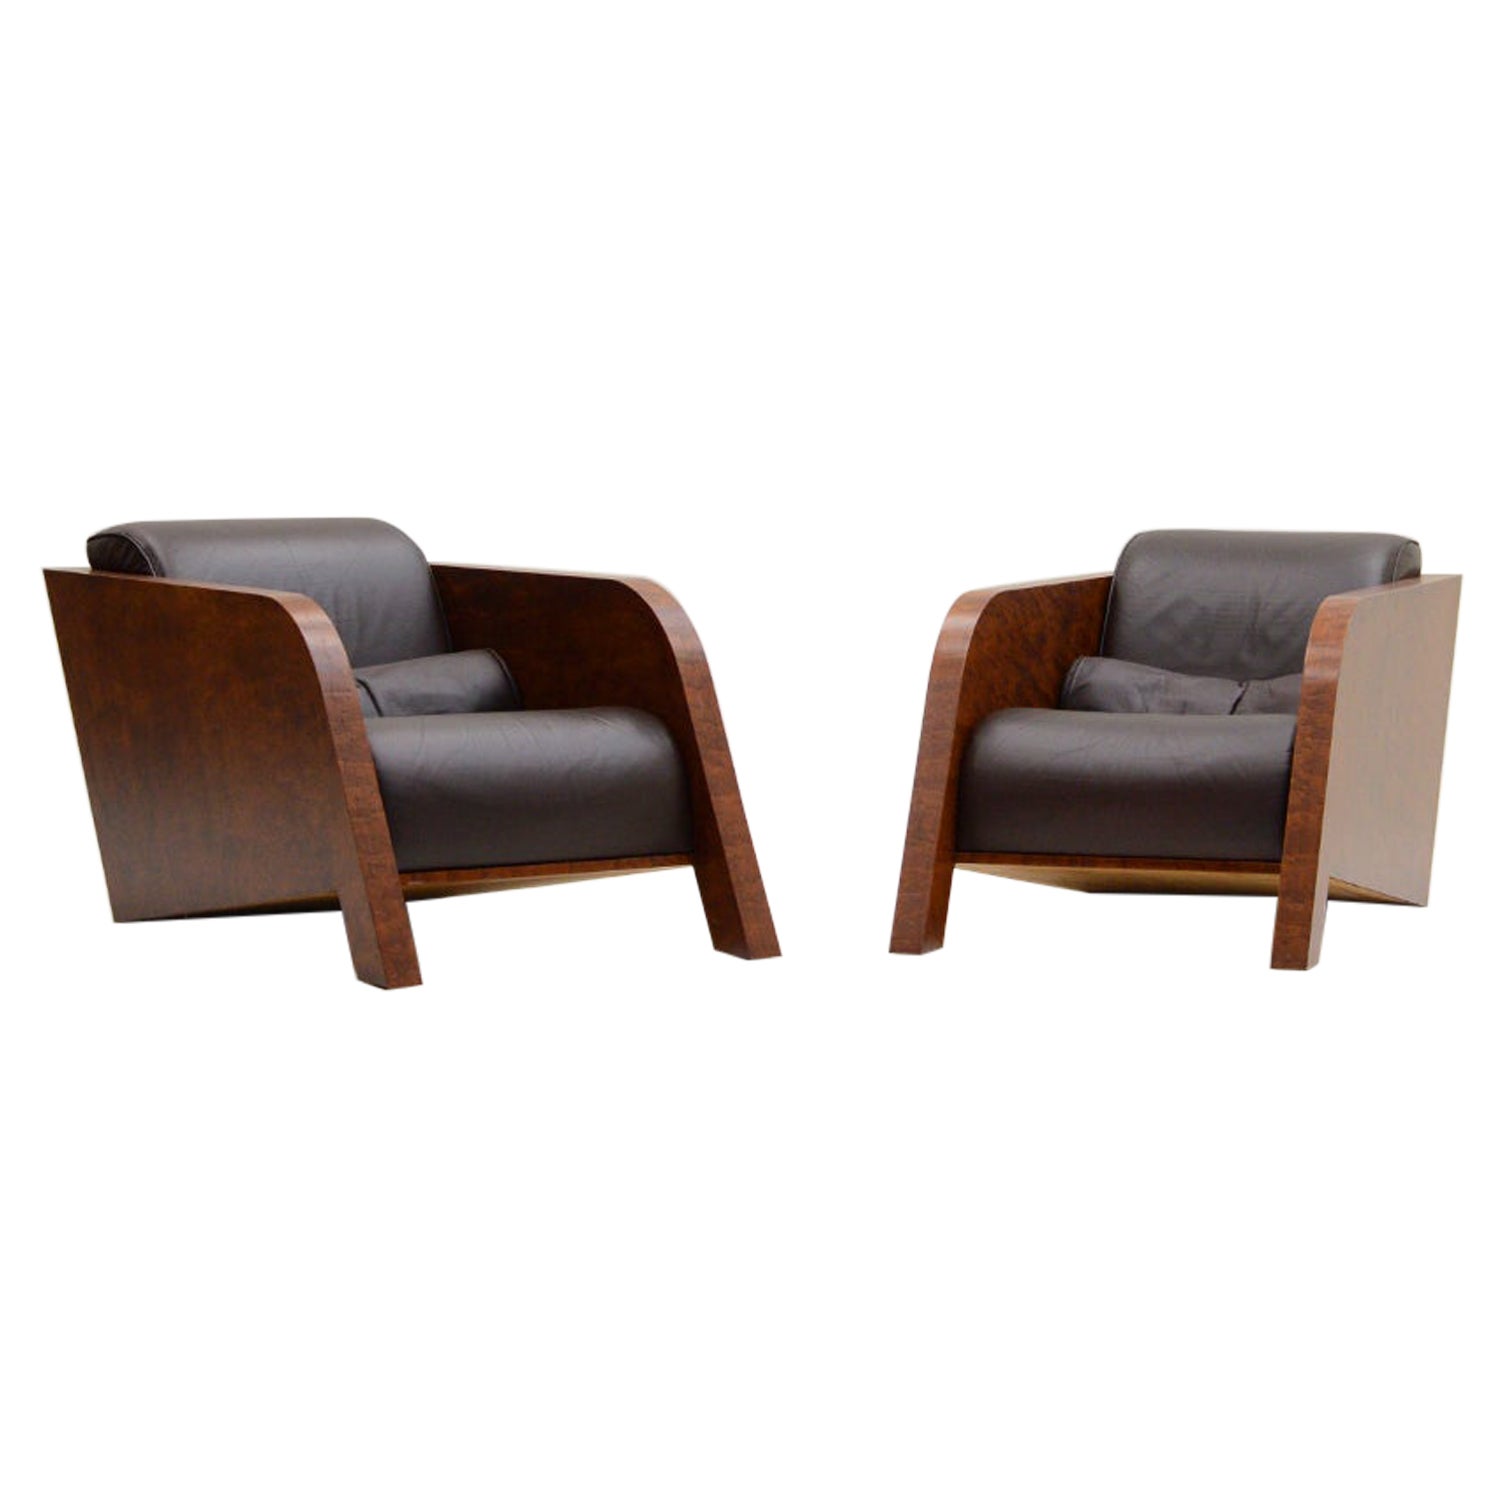 Set of 2 “Ypsilon” lounge chairs by Ulf Moritz, 1980s The Netherlands. For Sale